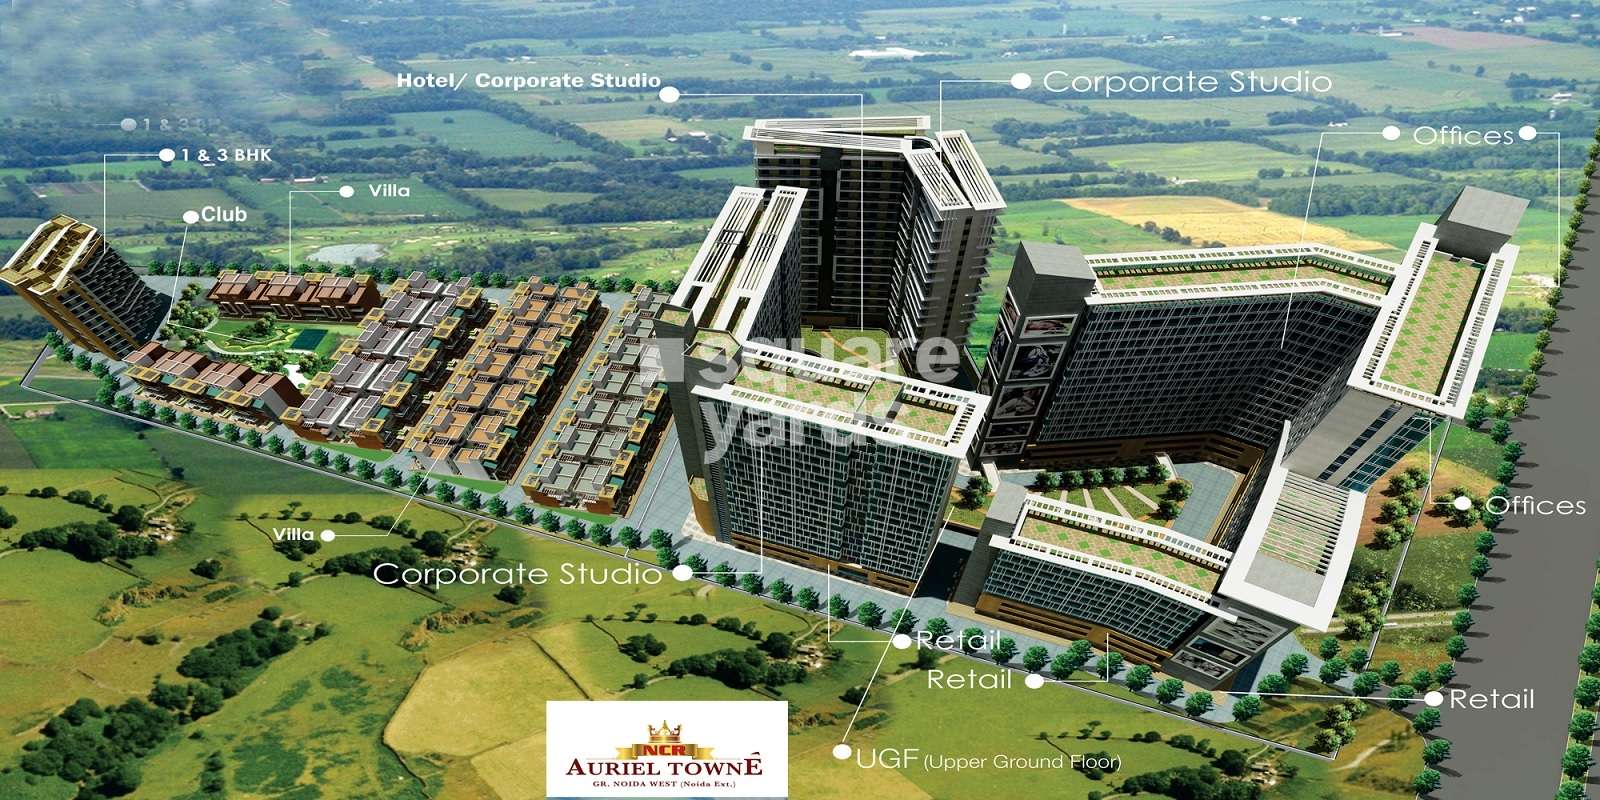 ncr auriel towne tower view7